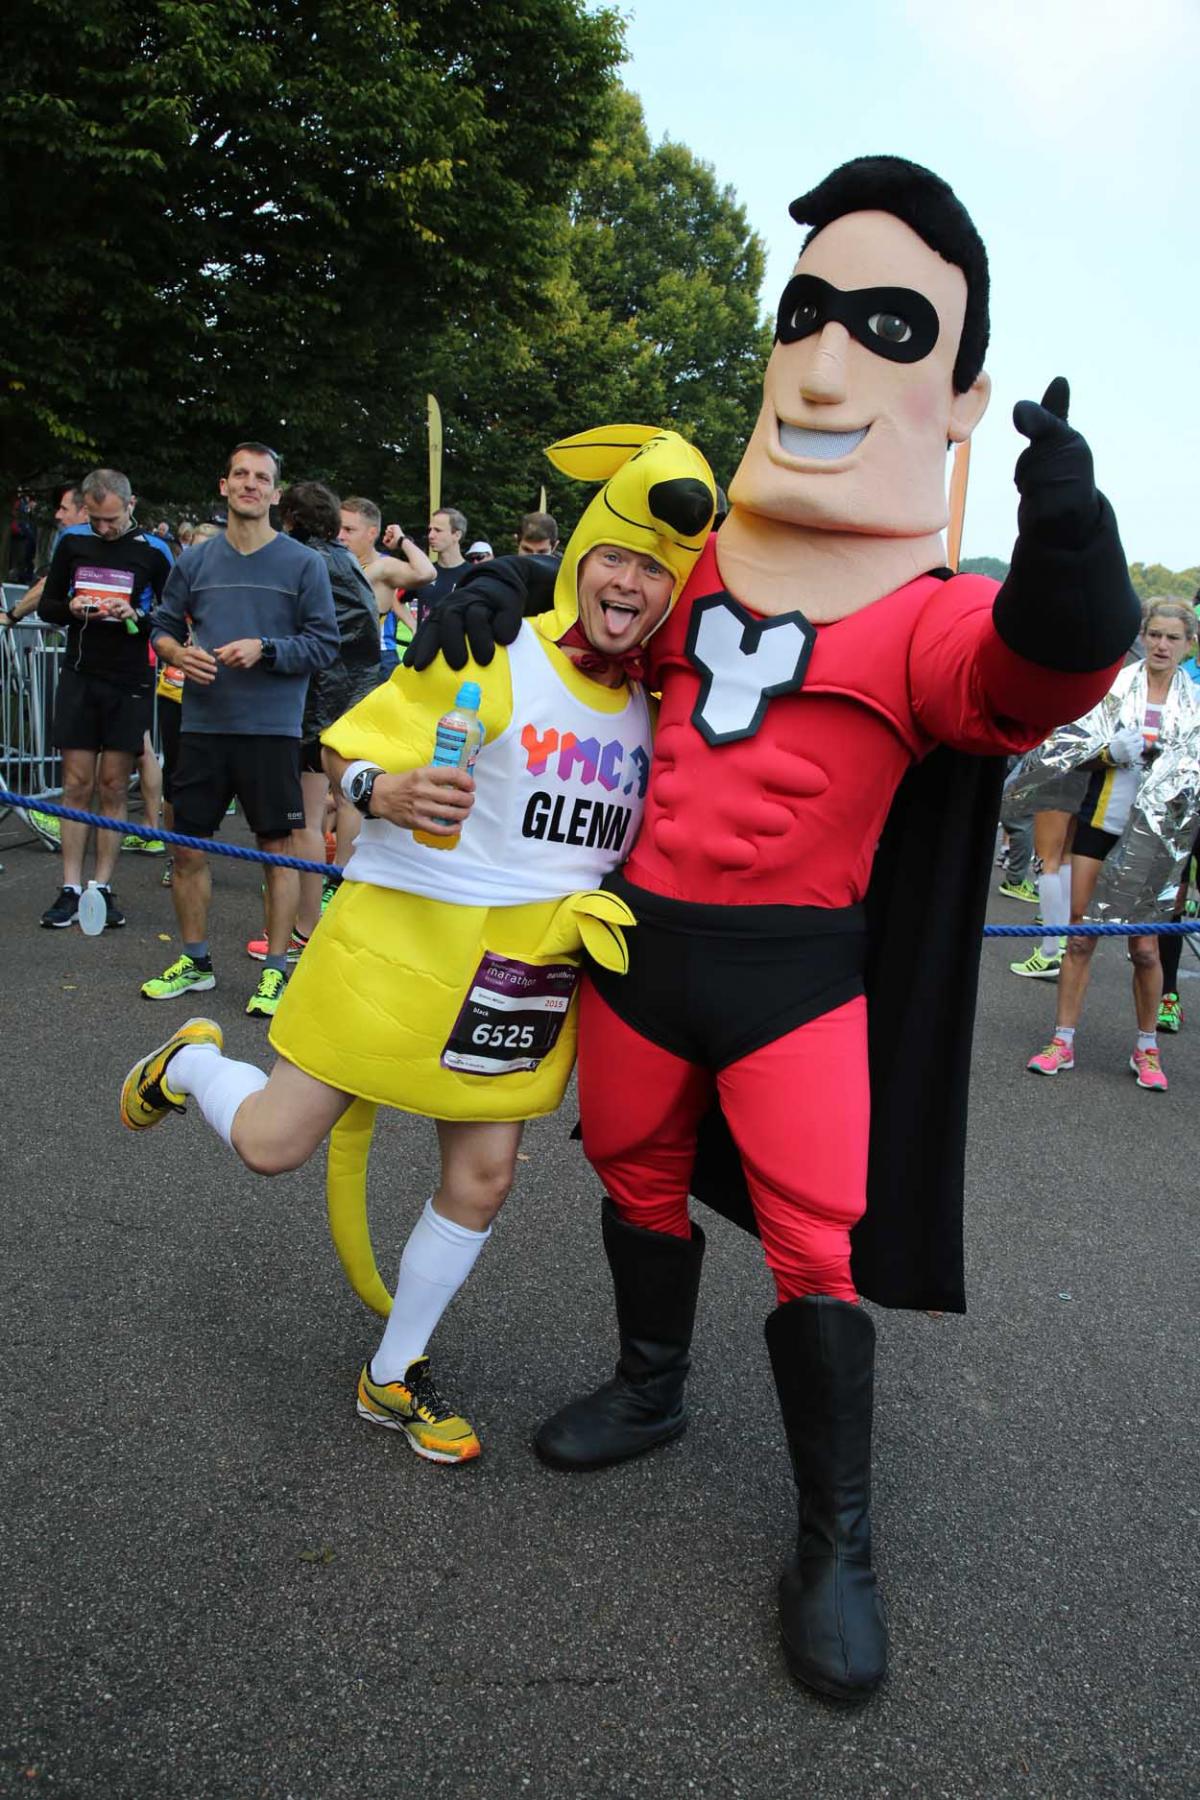 Pictures from the 2015 Bournemouth Marathon 